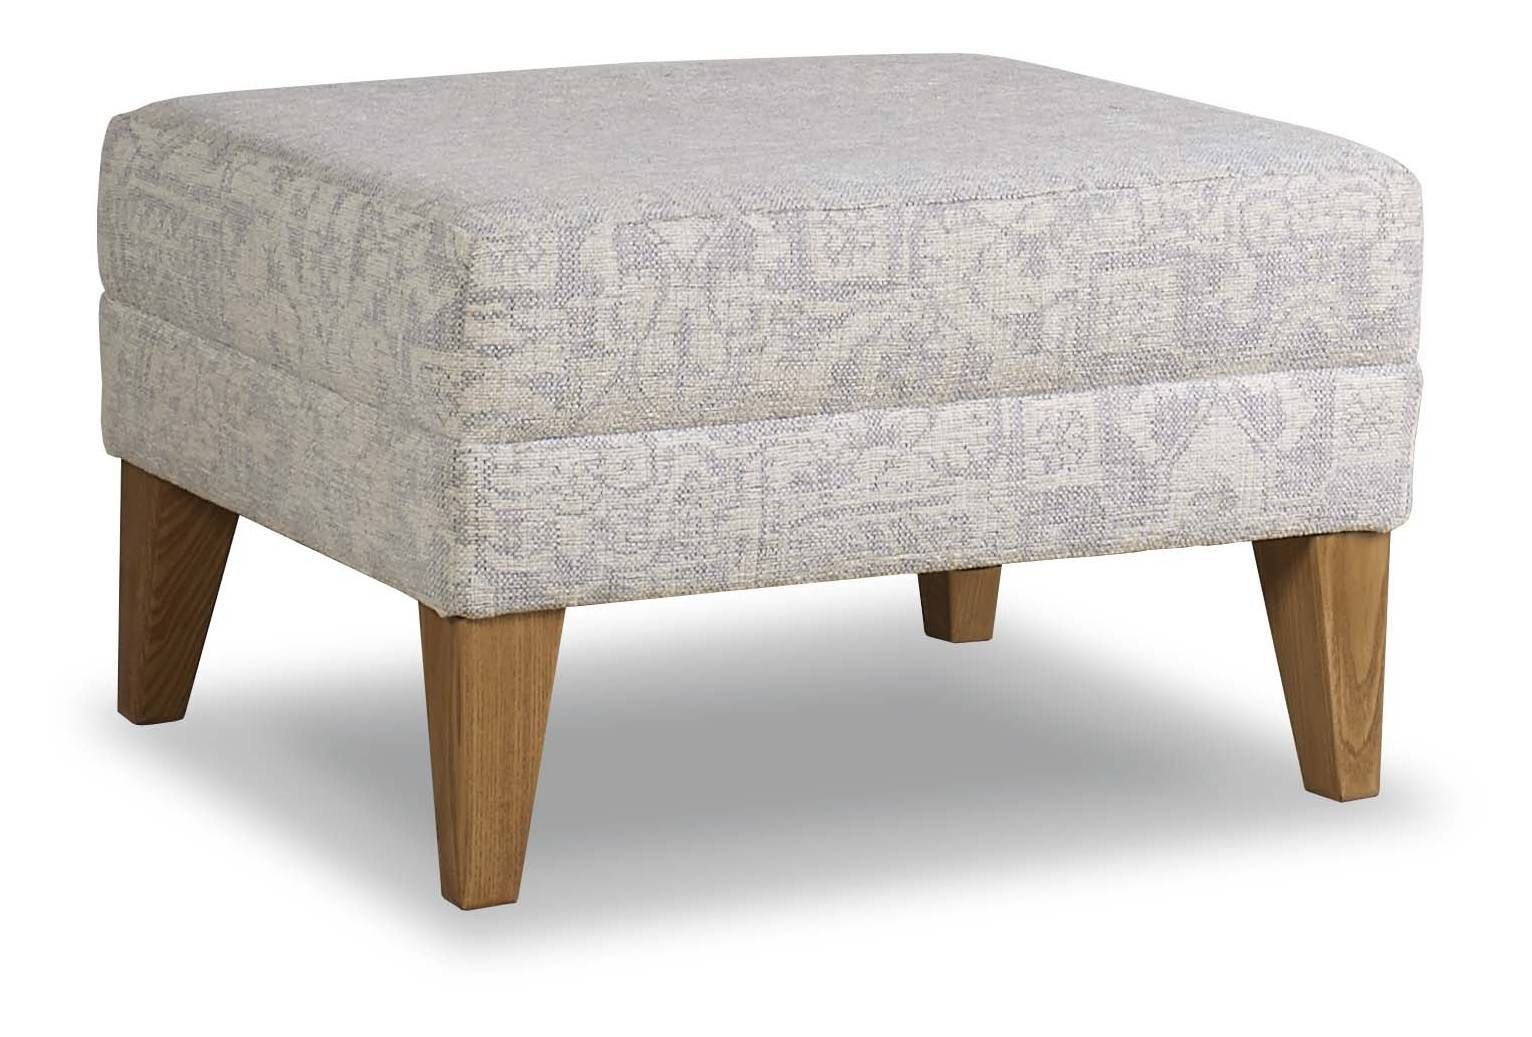 Fabric Footstools – Sofas And Chairs Intended For Fabric Footstools (View 3 of 30)